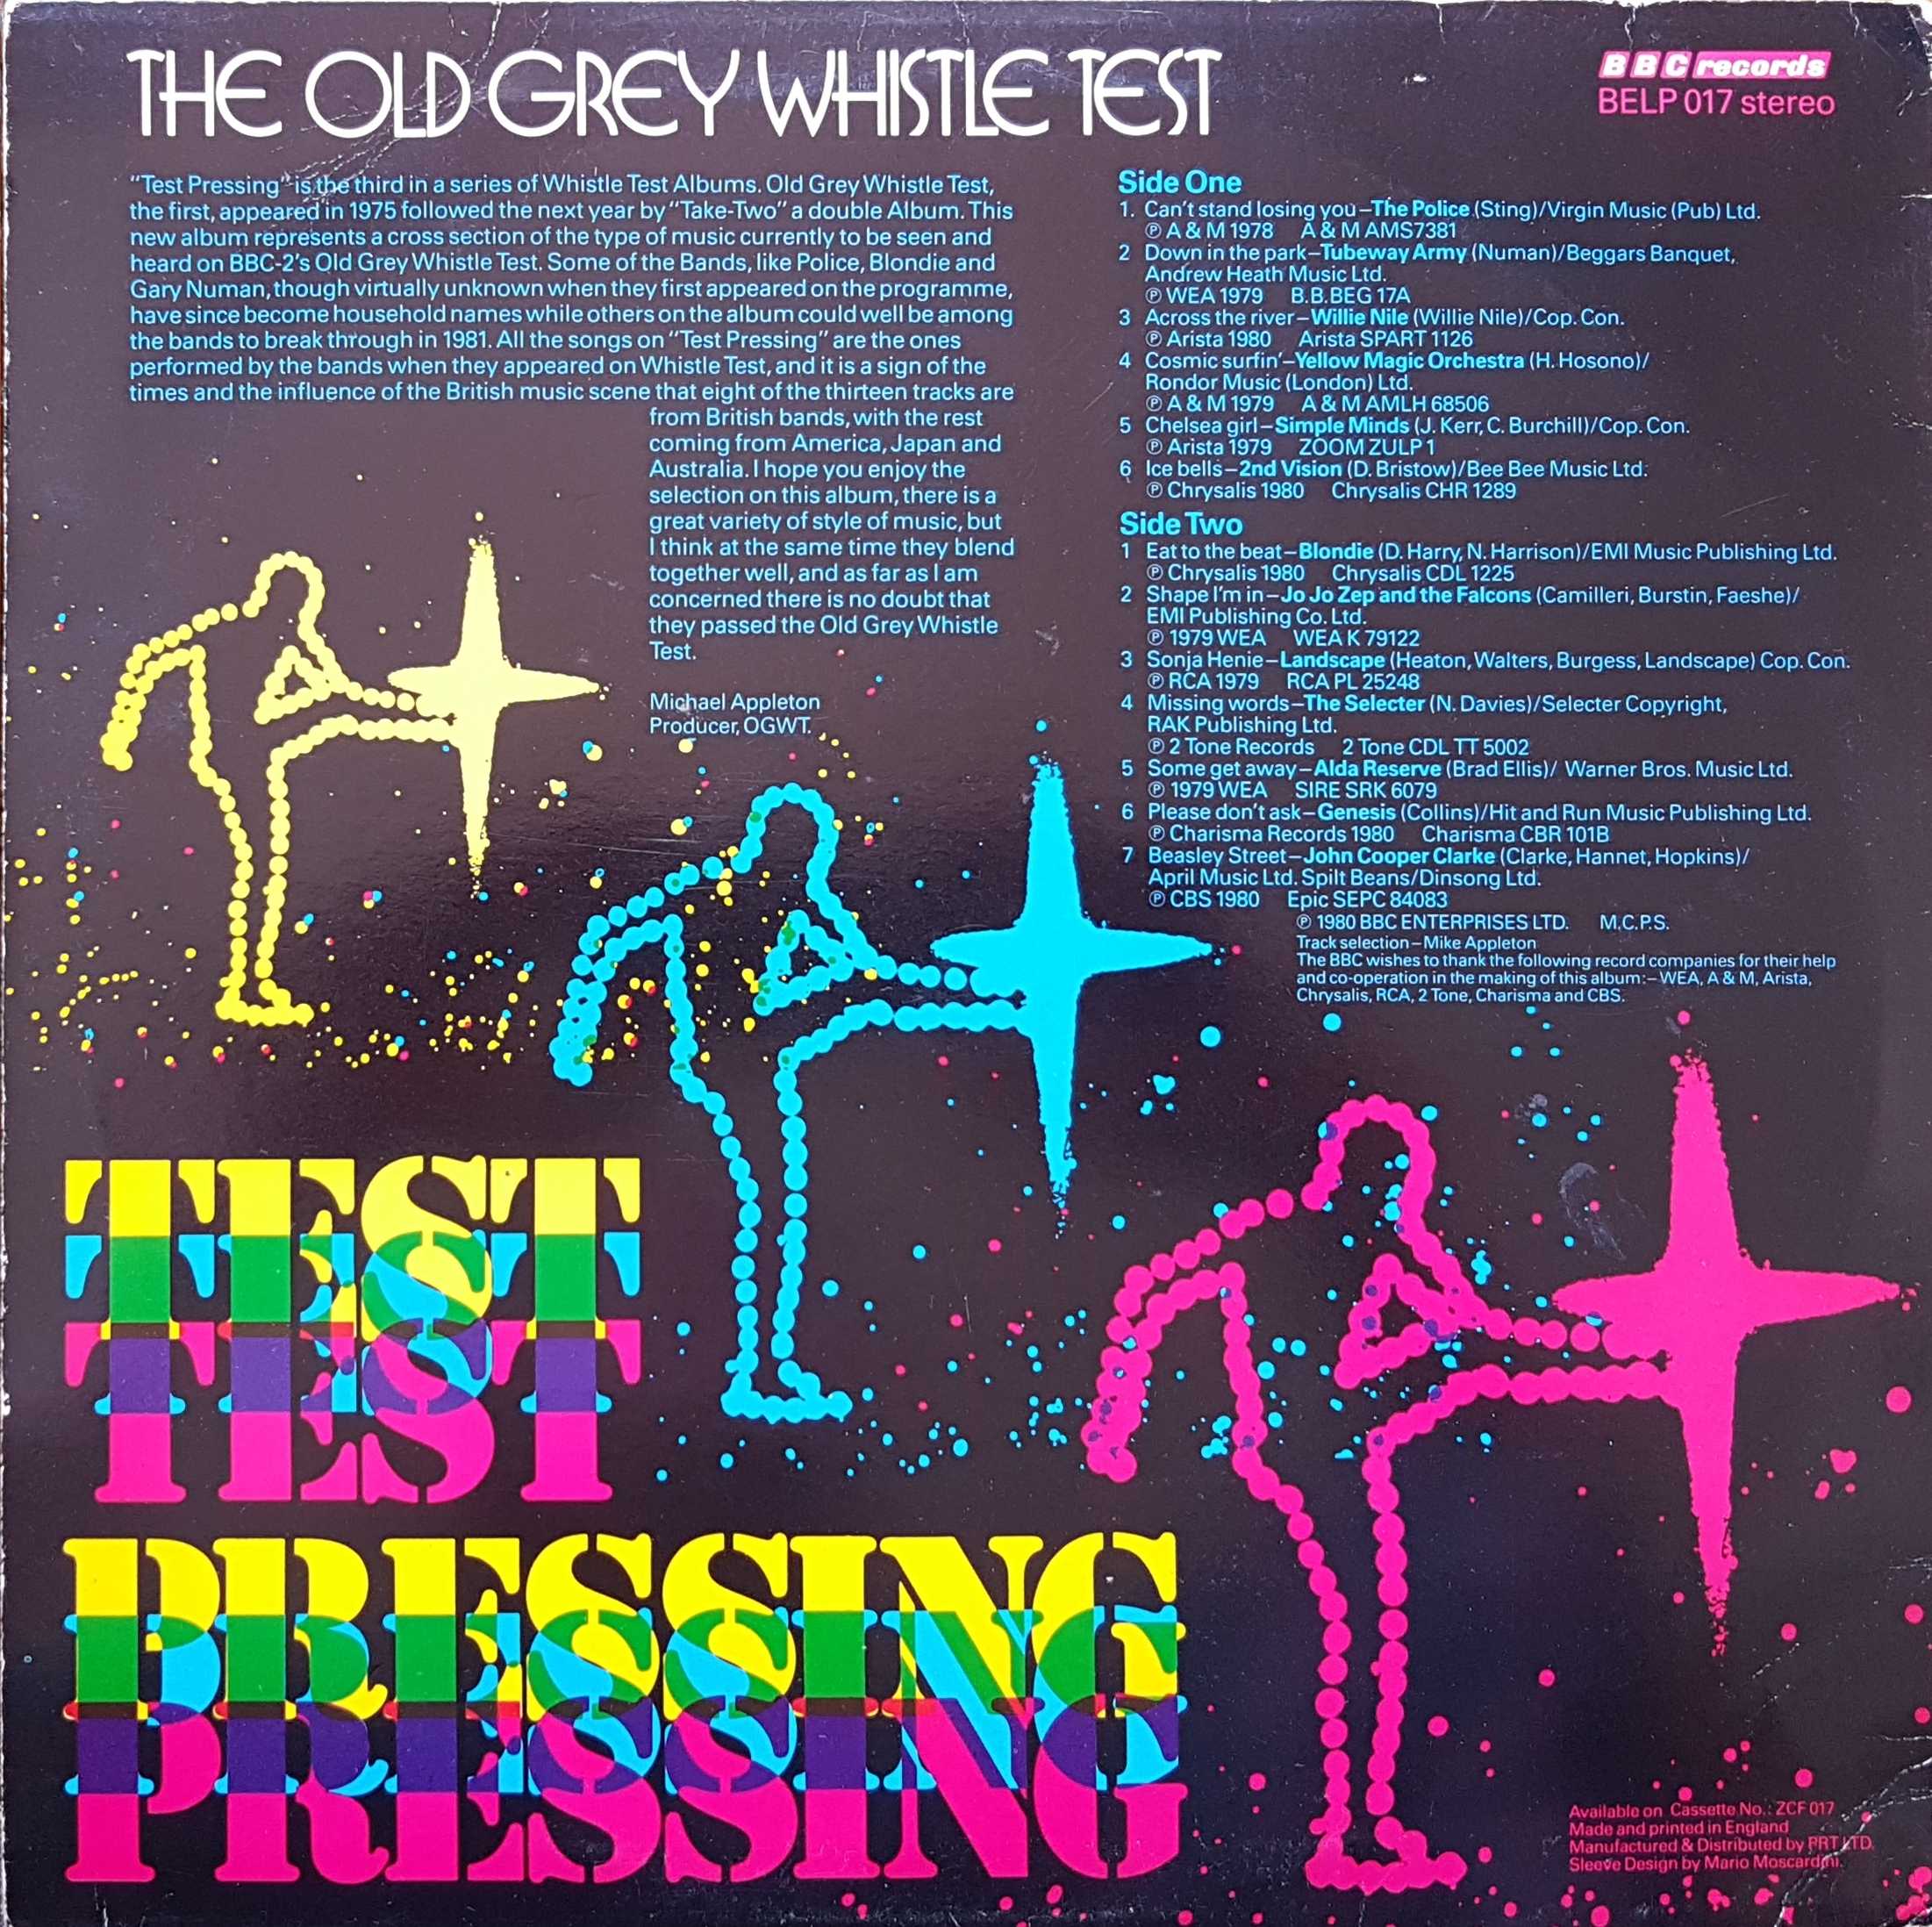 Picture of BELP 017 Old grey whistle test by artist Various from the BBC records and Tapes library